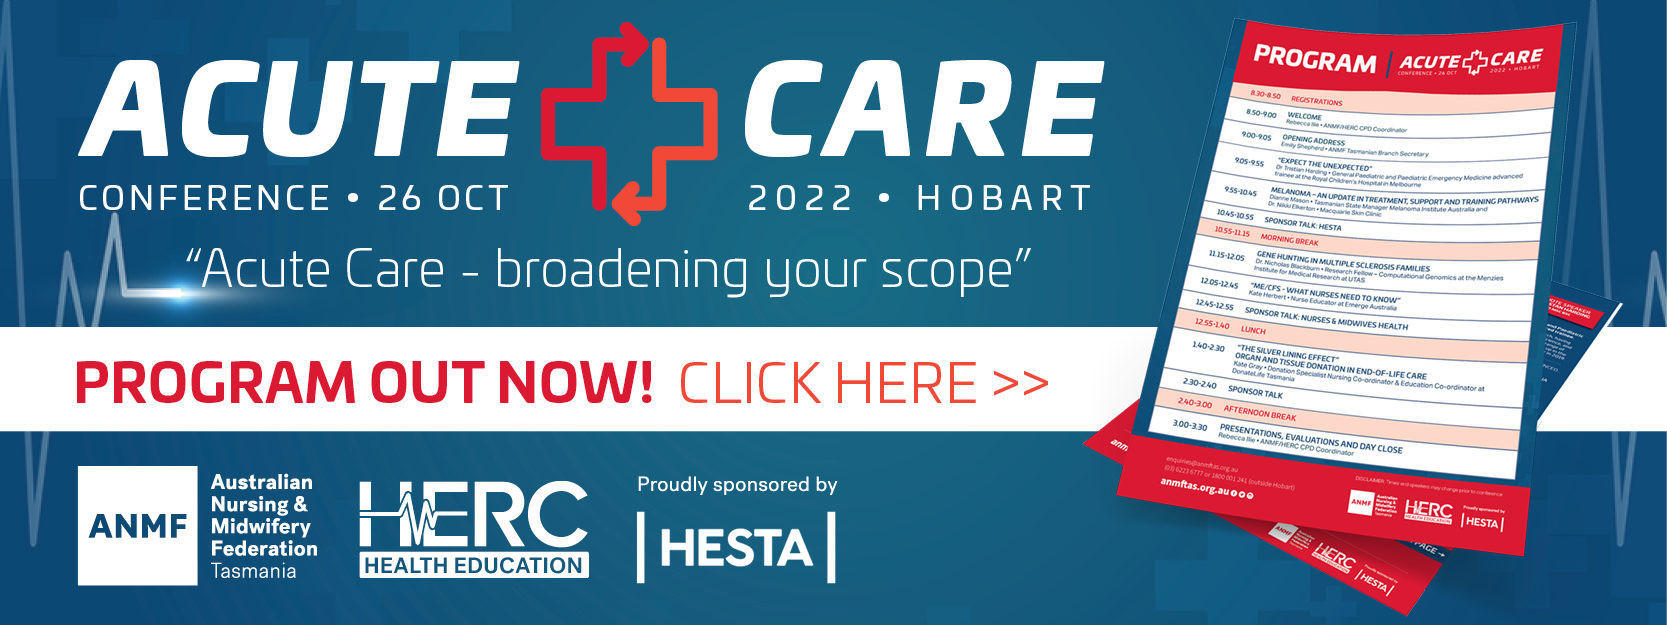 2022 Acute Care Conference Program Out Now